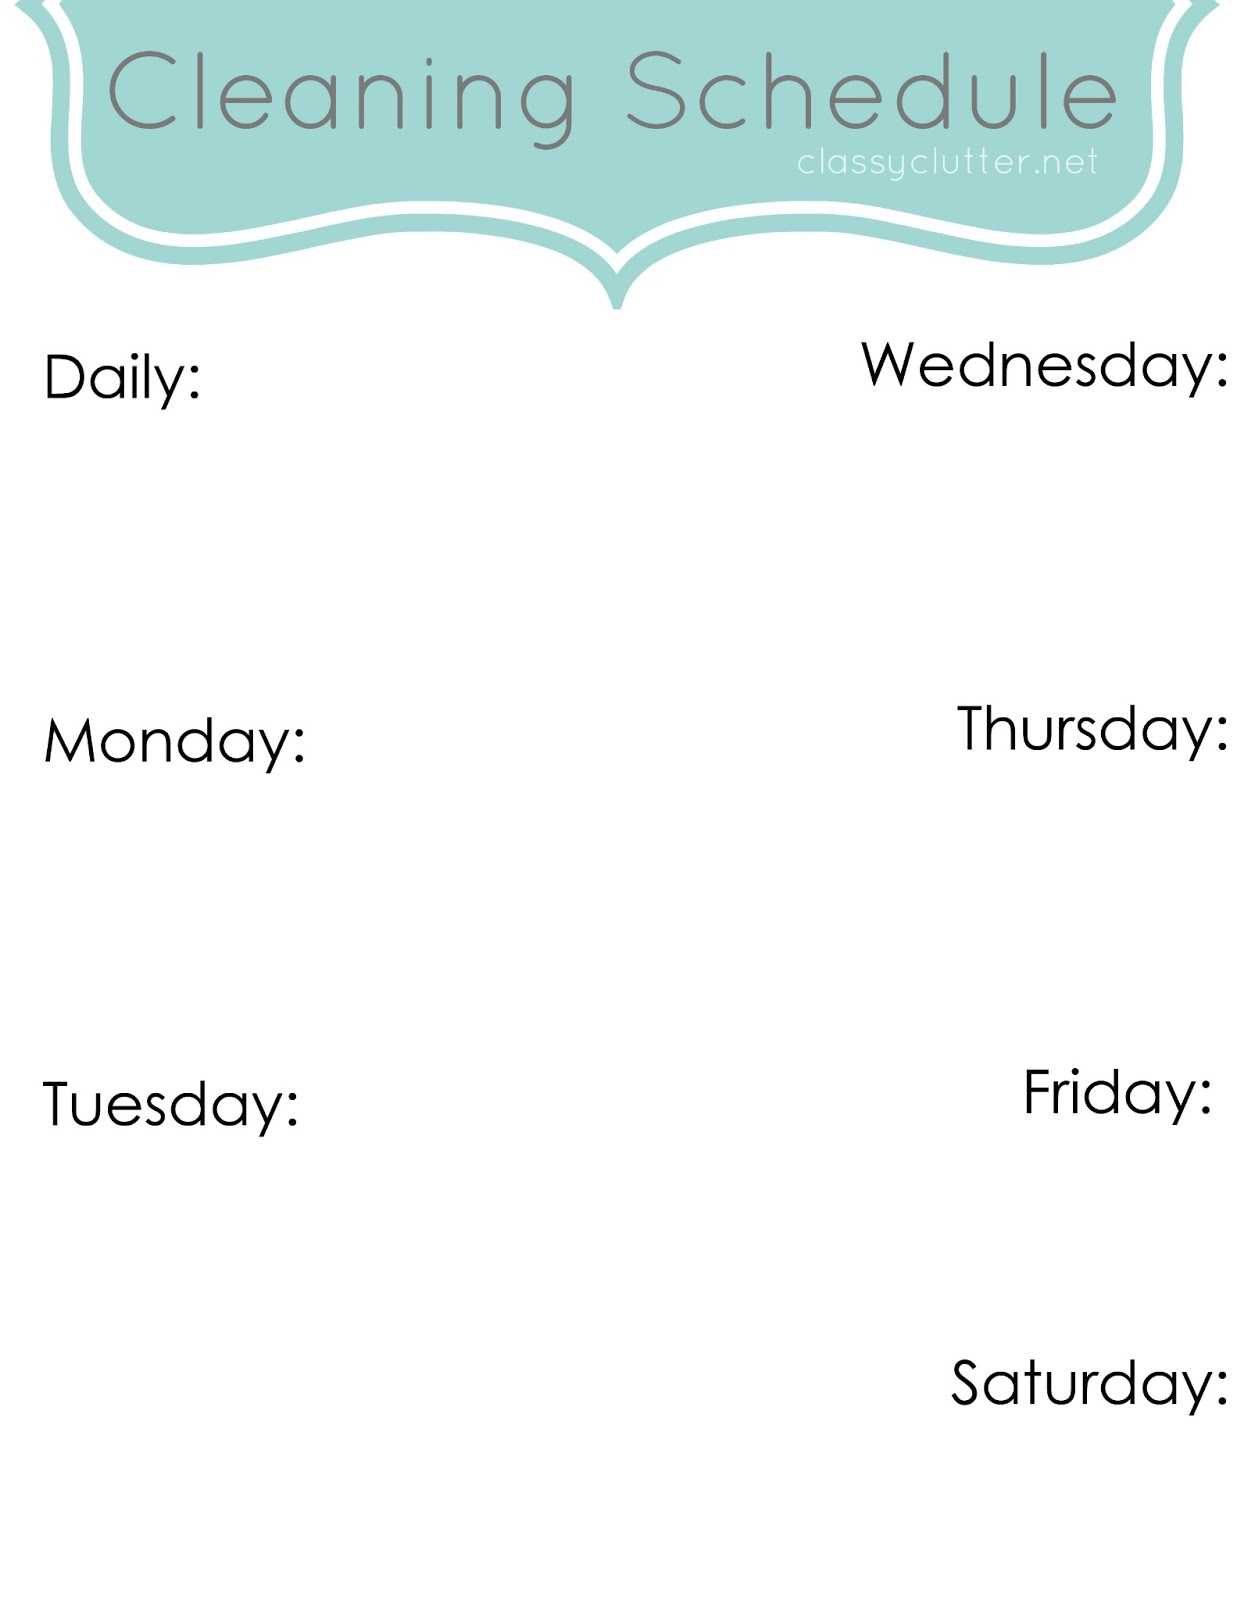 Weekly Cleaning Schedule: Improve Your Cleaning Habits With Blank Cleaning Schedule Template